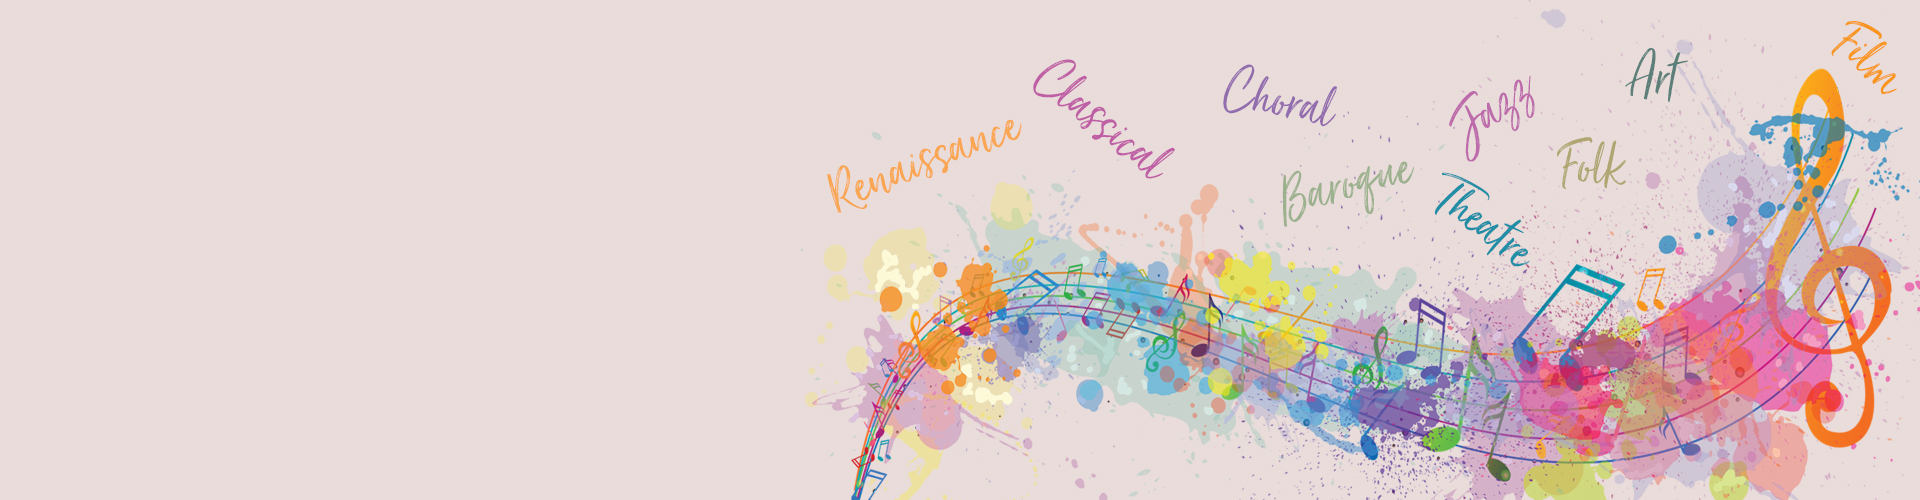 Colourful artistic banner featuring musical notes and splashes of paint with the words Renaissance, Classical, Choral, Baroque, Jazz, Folk, Art, Film, and Theatre.